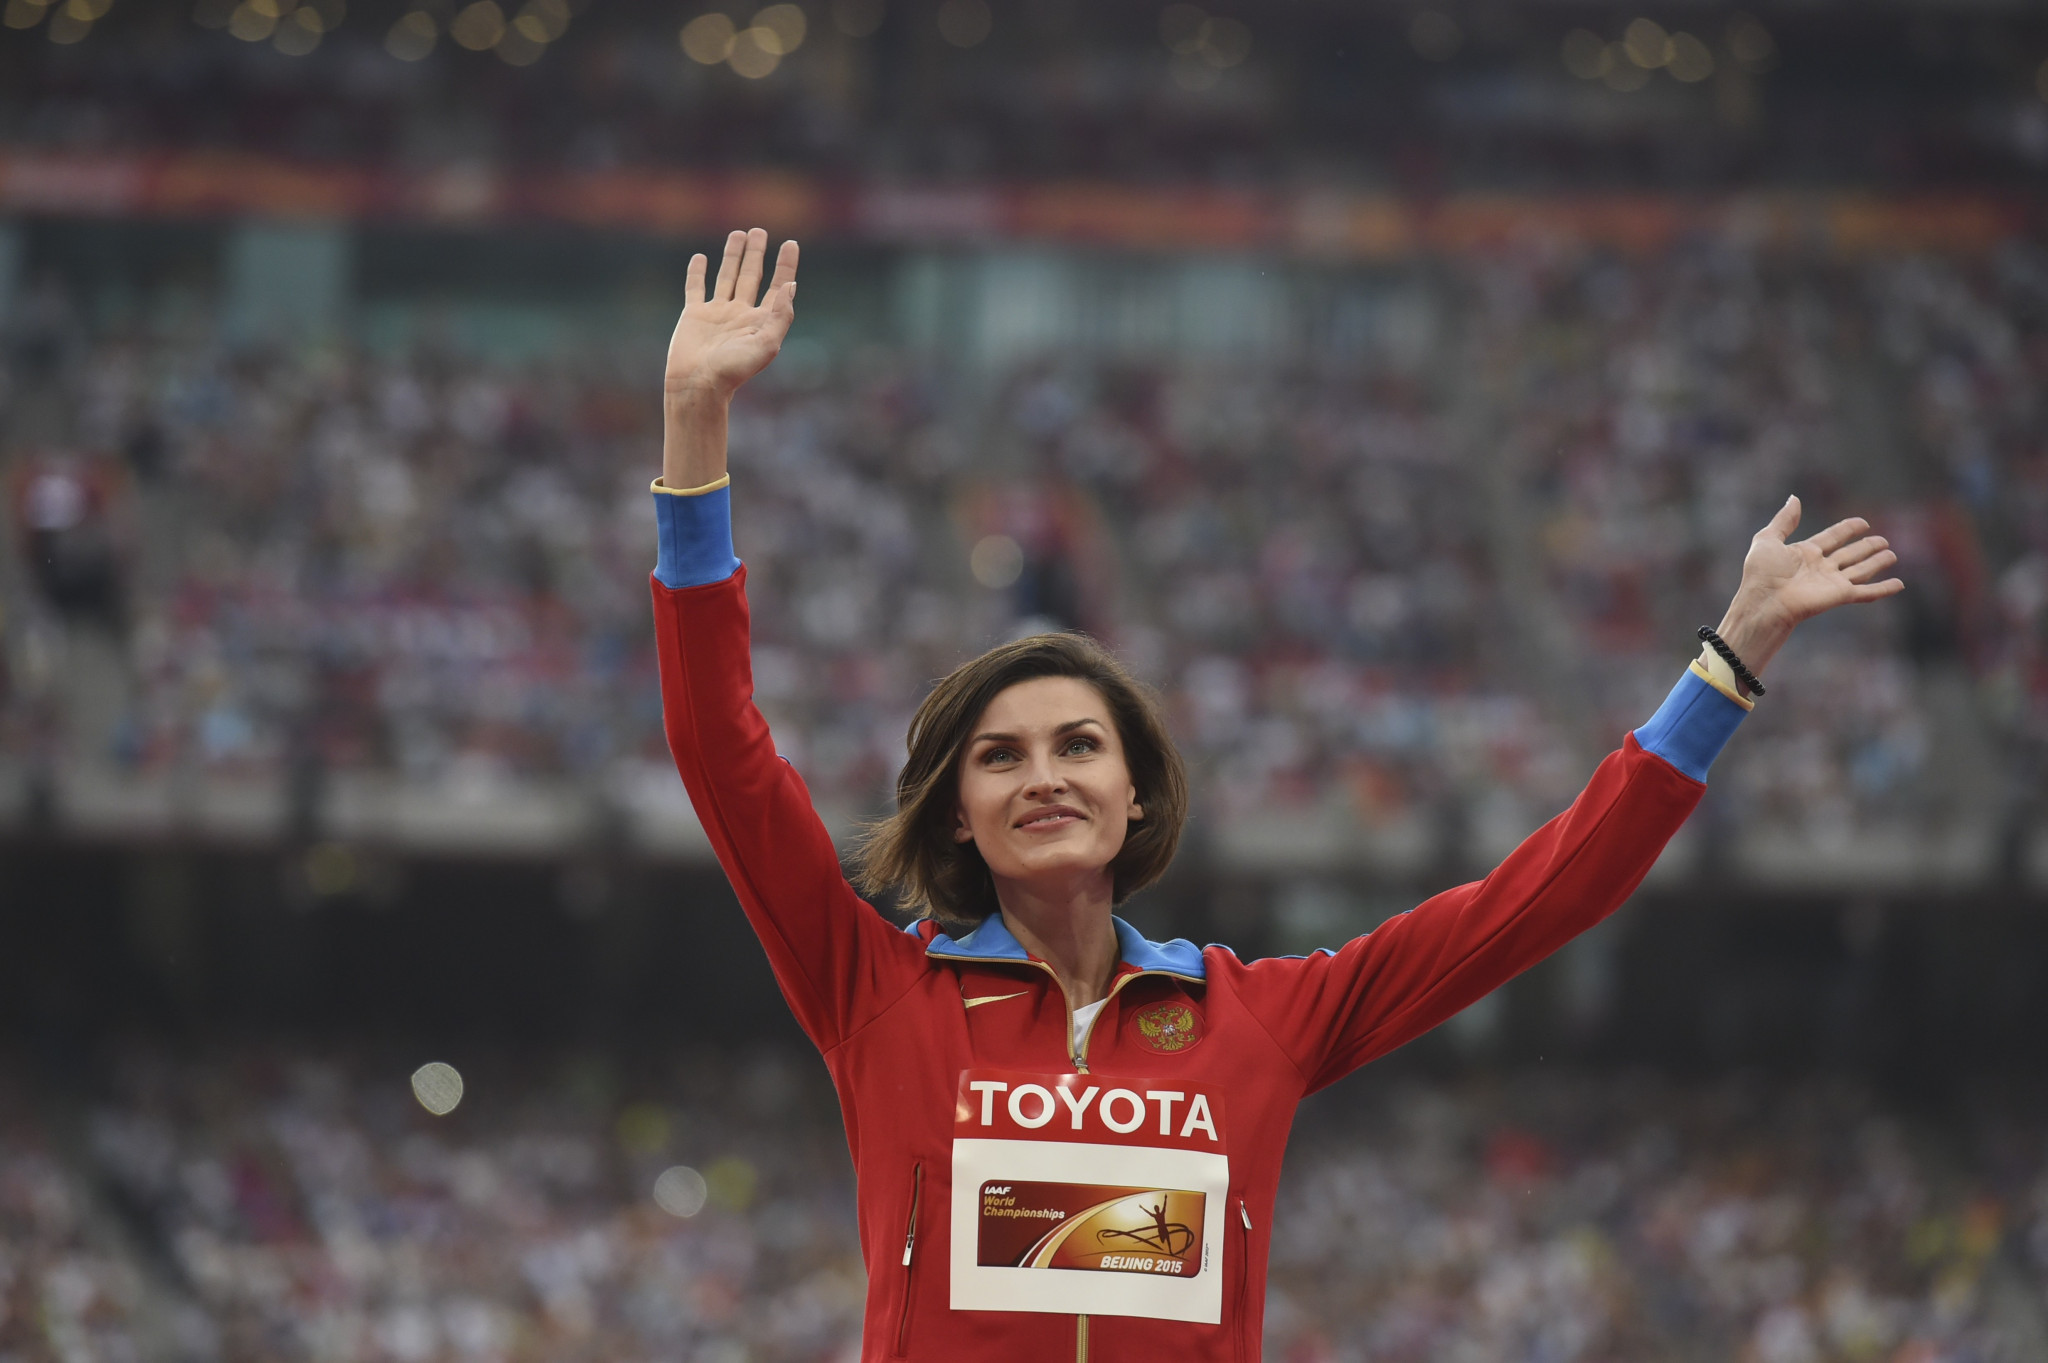 Russian Olympic champions have neutral status refused by IAAF